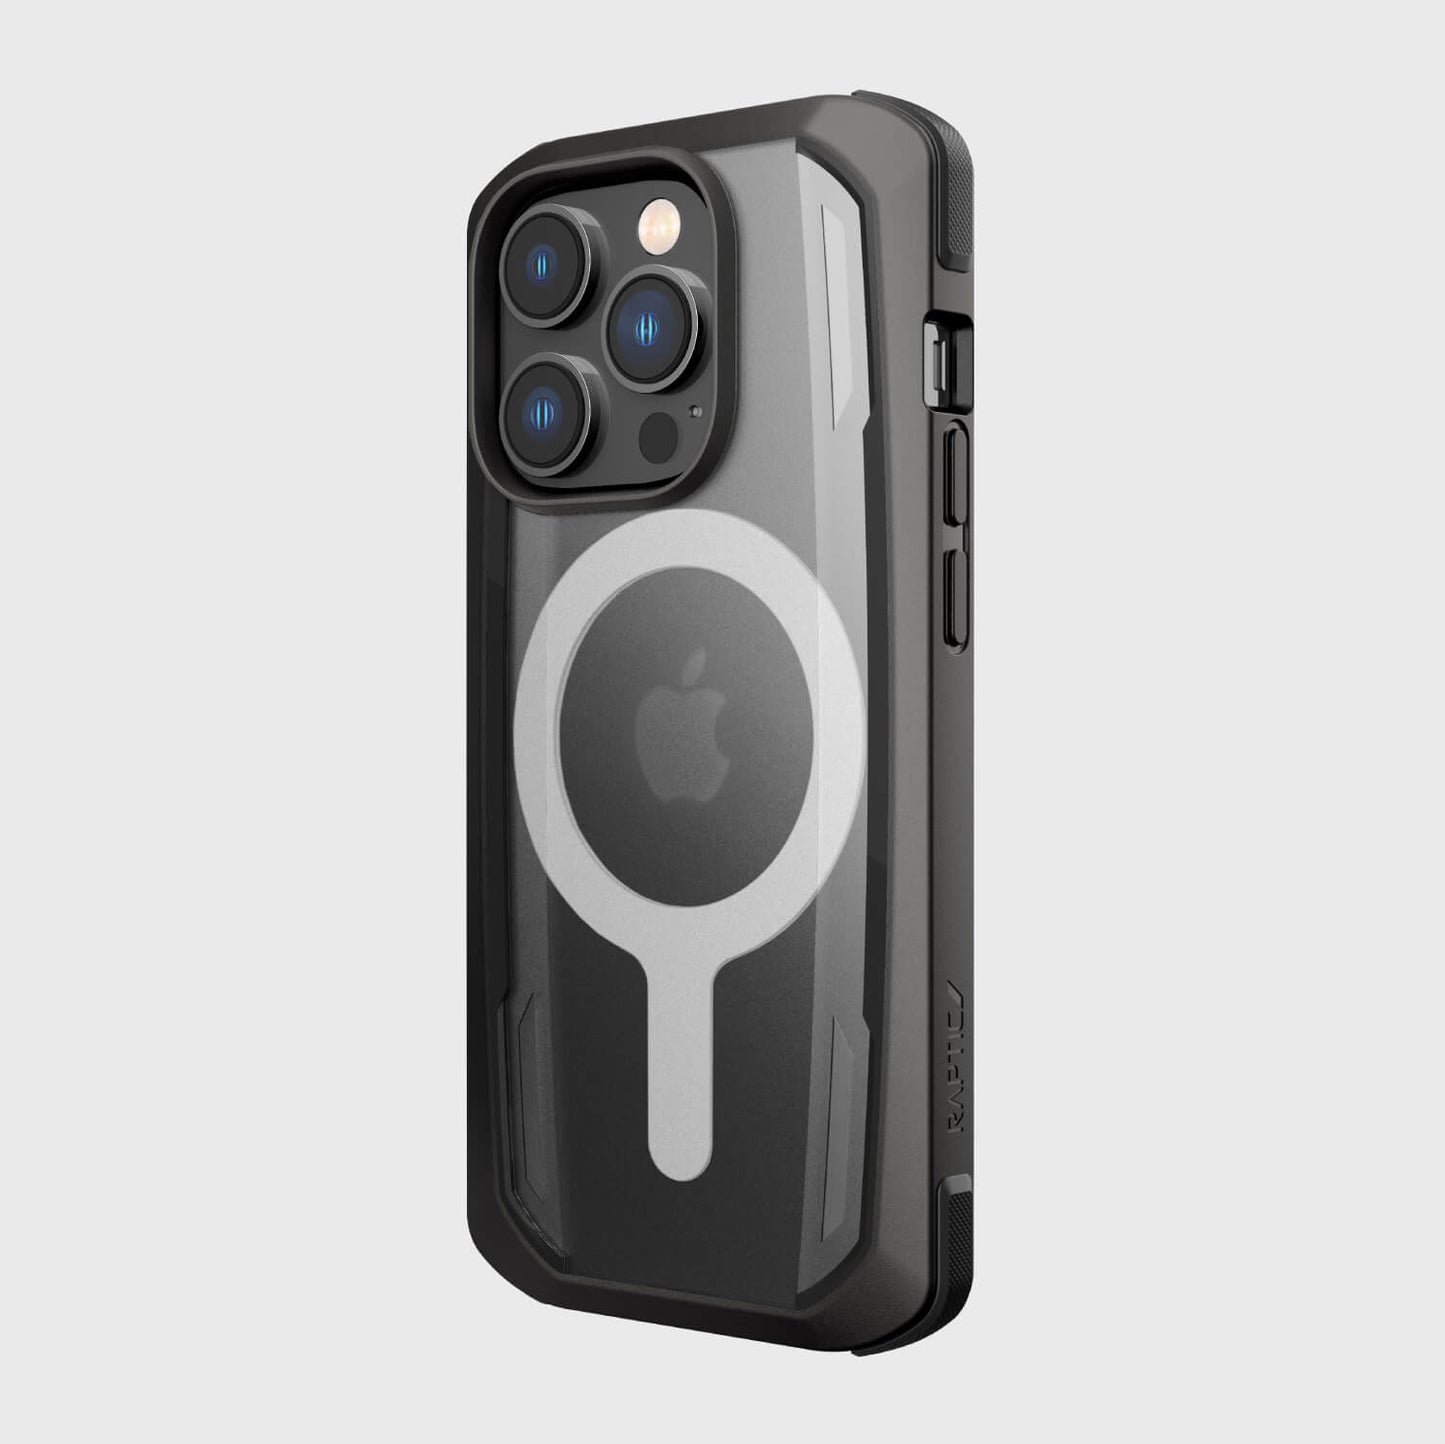 The iPhone 14 Pro Case by Raptic is shown in black.